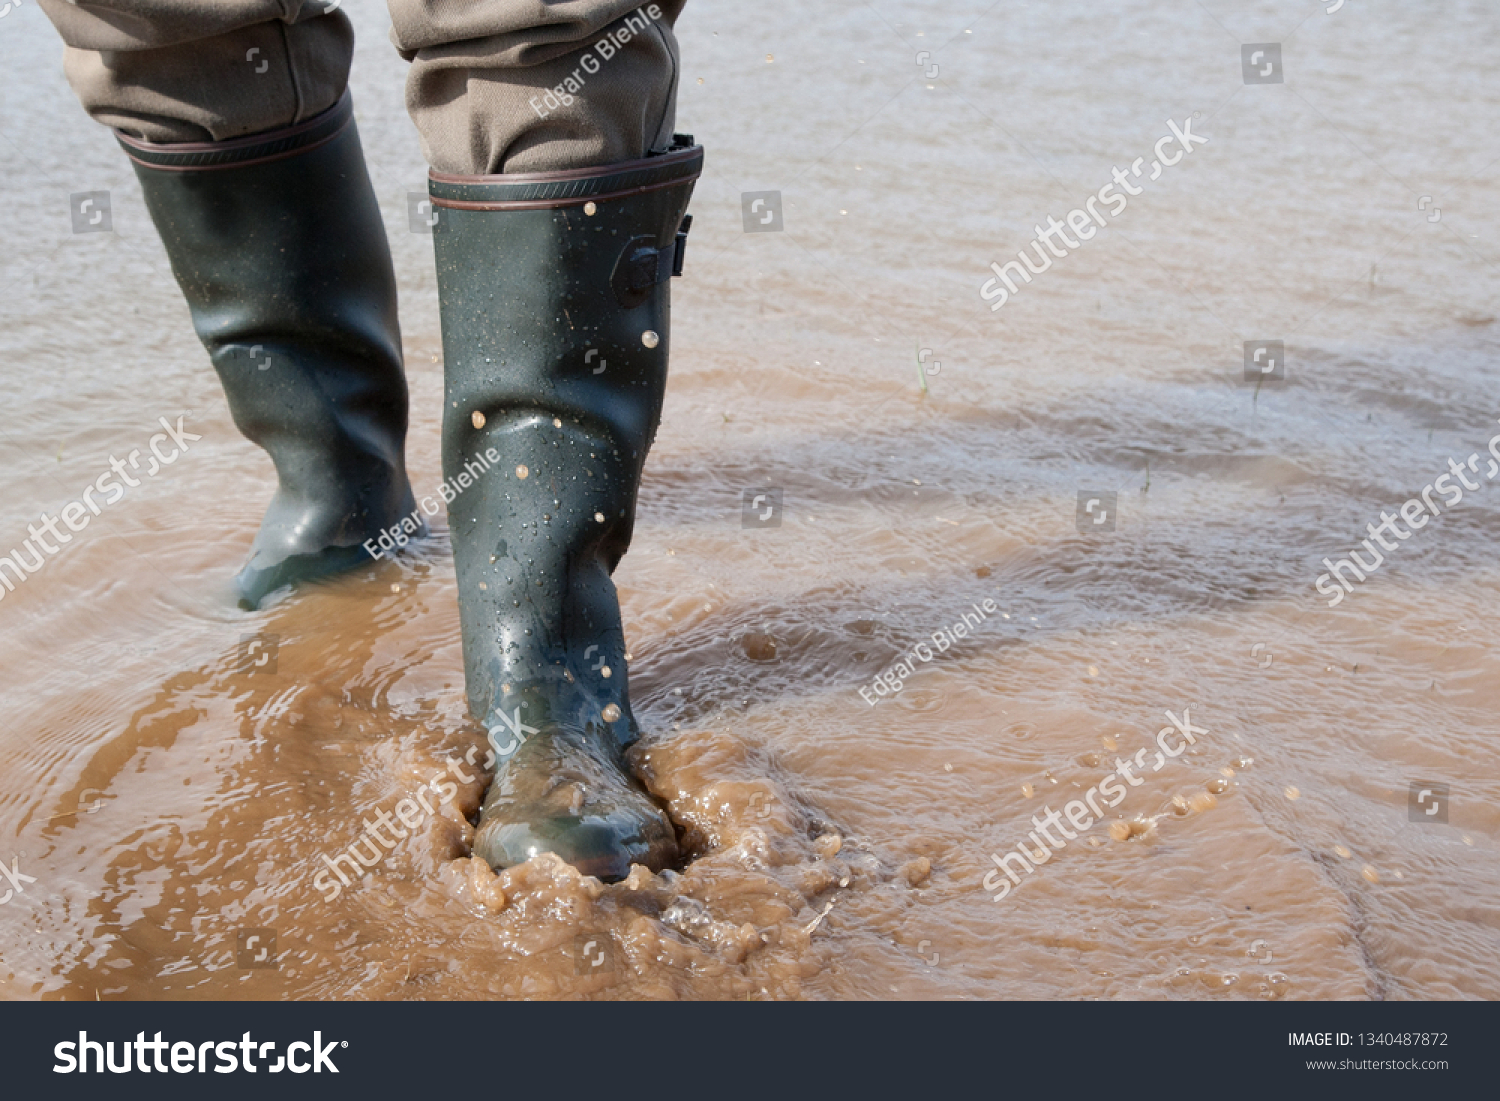 Rain Goes Rubber Boots Stock Photo 